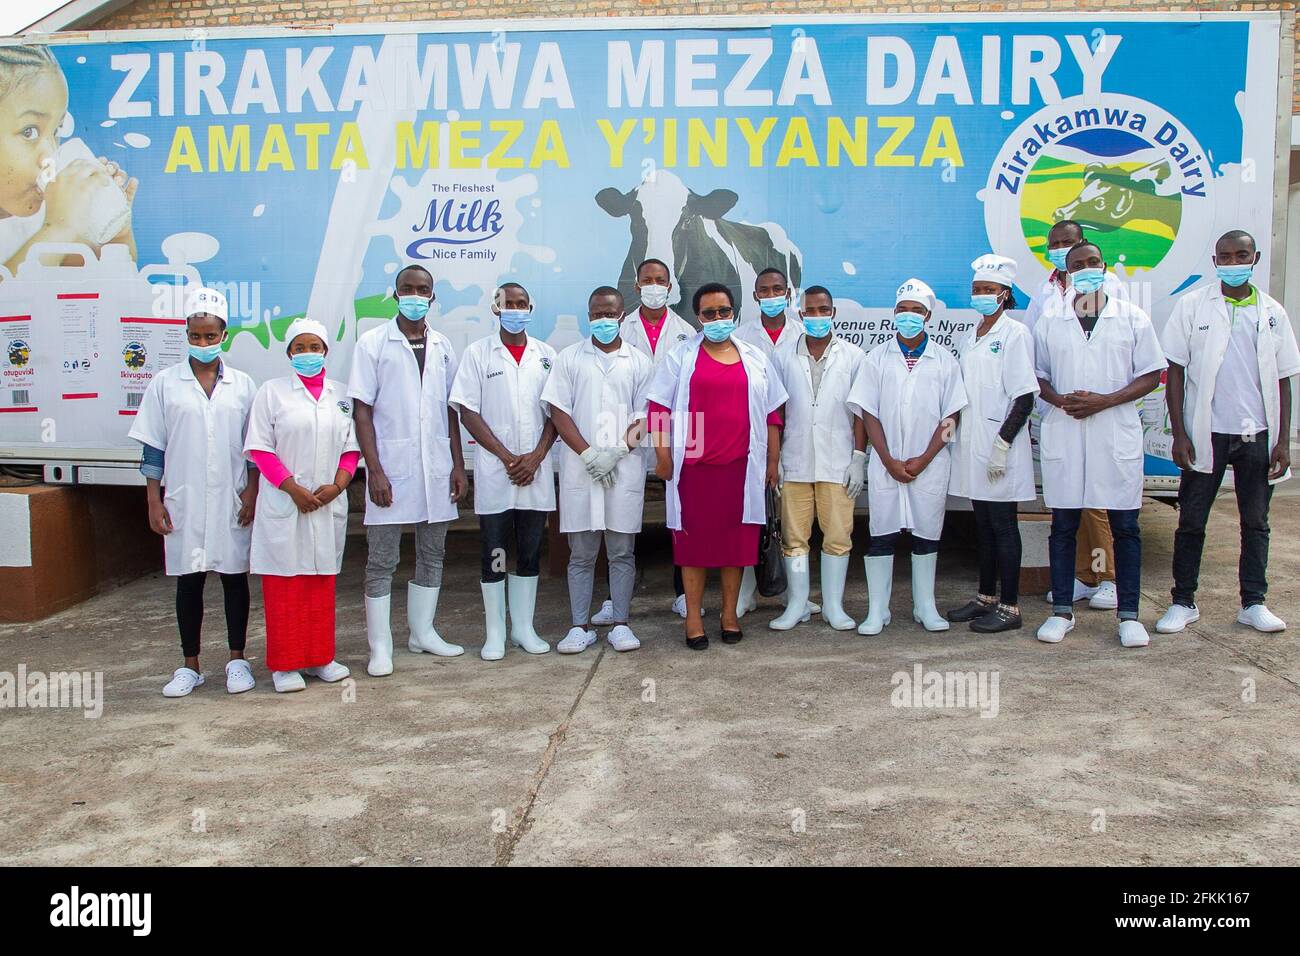 (210502) -- NYANZA, May 2, 2021 (Xinhua) -- Immaculee Kayitesi (C), owner of Zirakamwa Meza Dairy, poses for a group photo with employees of her company in Nyanza district, about a two-hour drive from the Rwandan capital city Kigali, on April 30, 2021. TO GO WITH 'Feature: From genocide widow to successful businesswoman -- Rwandan woman walking out of shadow' (photo by Cyril Ndegeya/Xinhua) Stock Photo